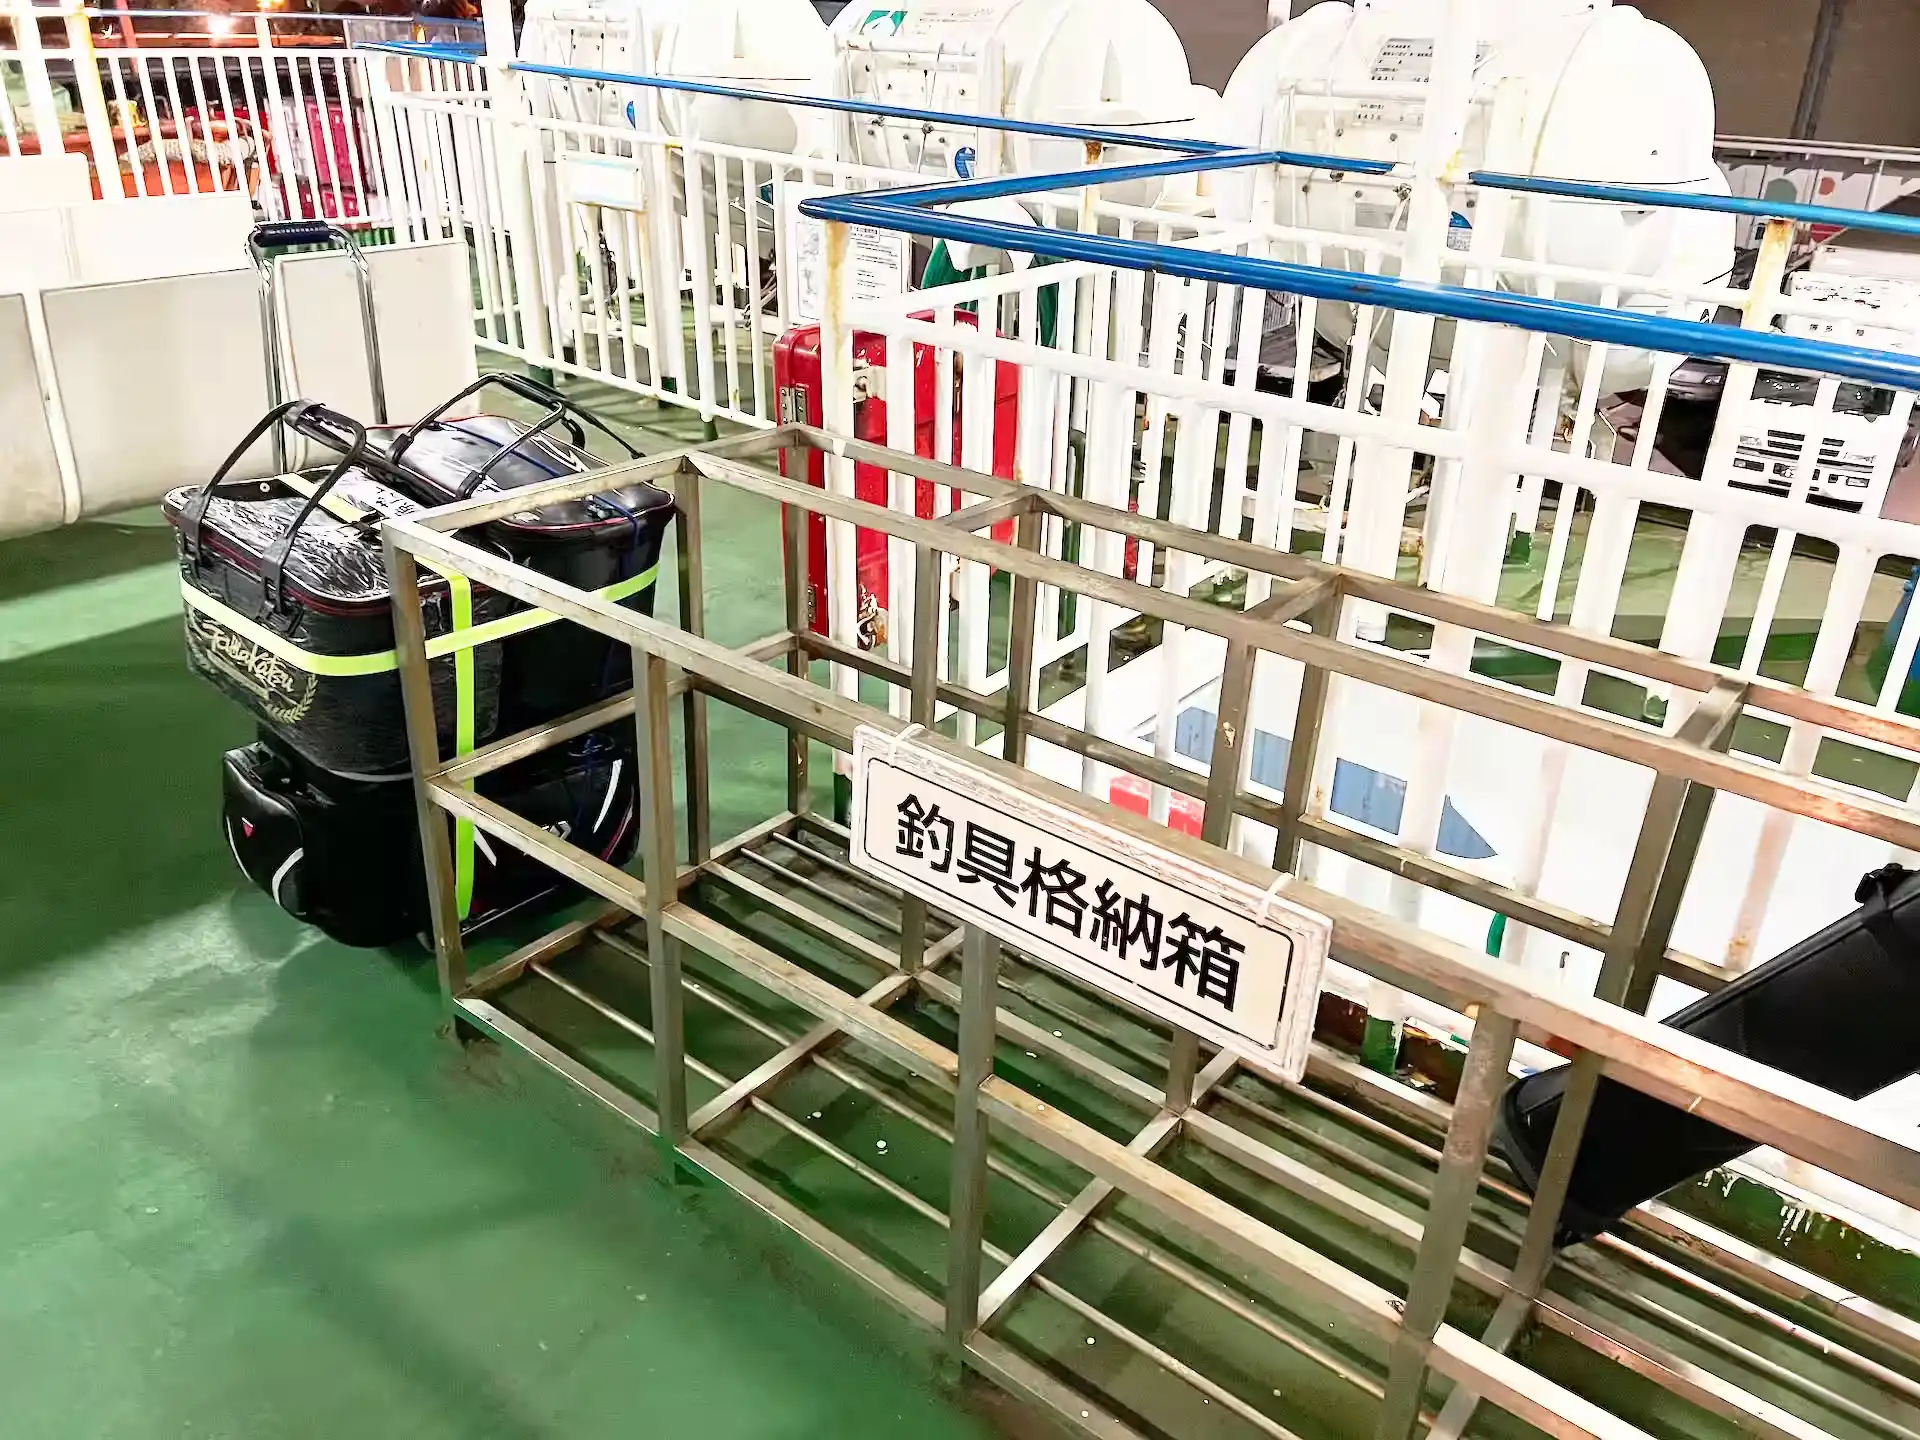 Fishing tackle storage area on the outdoor deck of the Kyushu Yusen Chikushi ferry